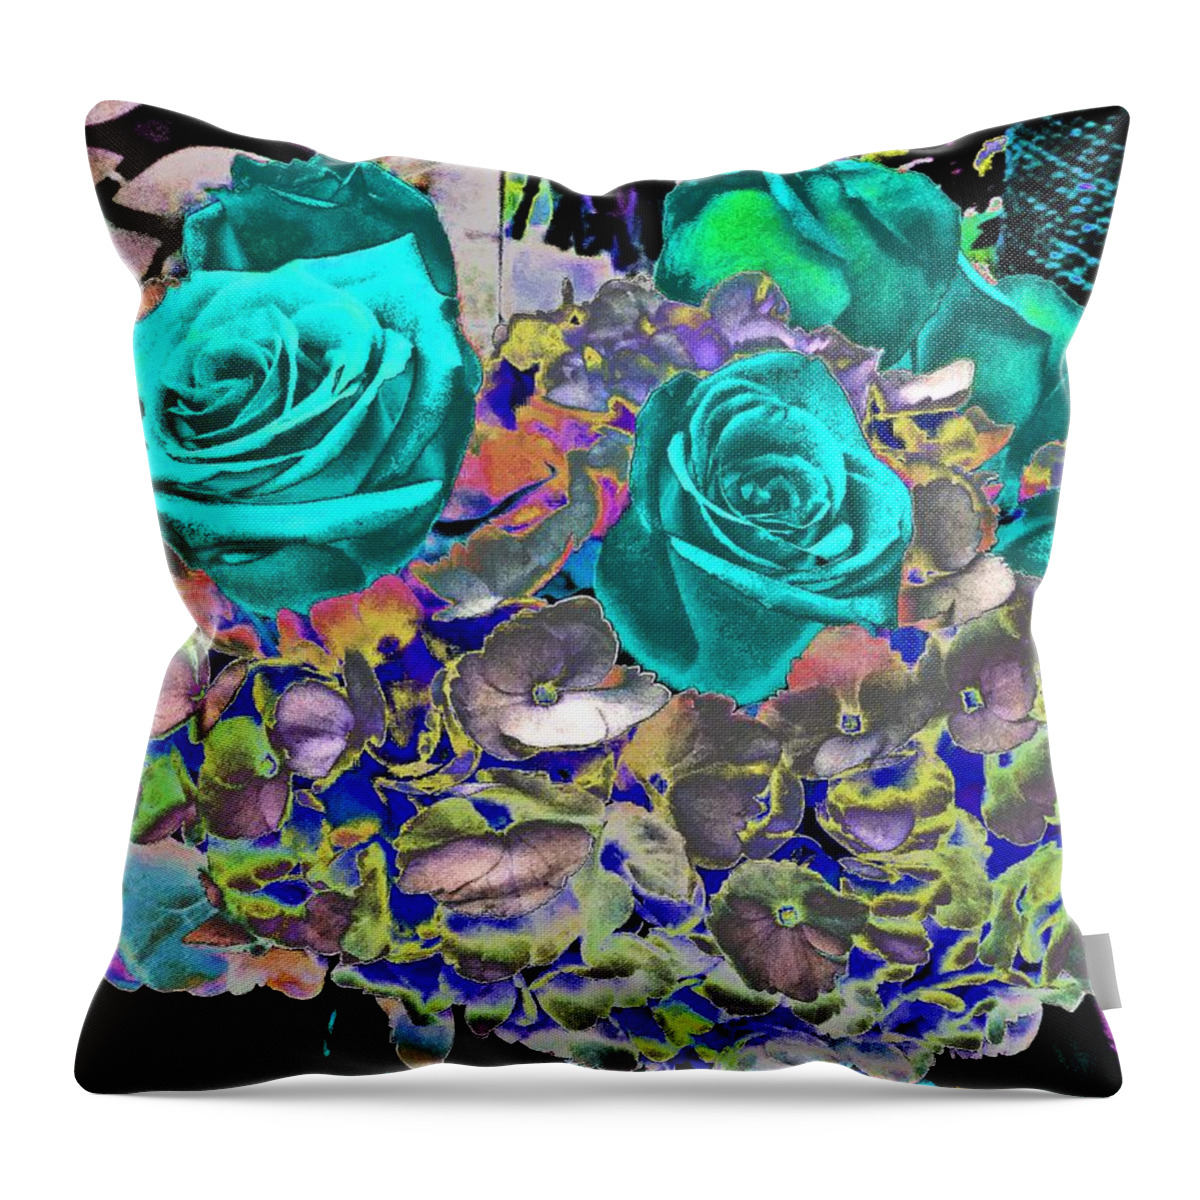 Roses Throw Pillow featuring the photograph Turquoise Roses by Andrew Lawrence